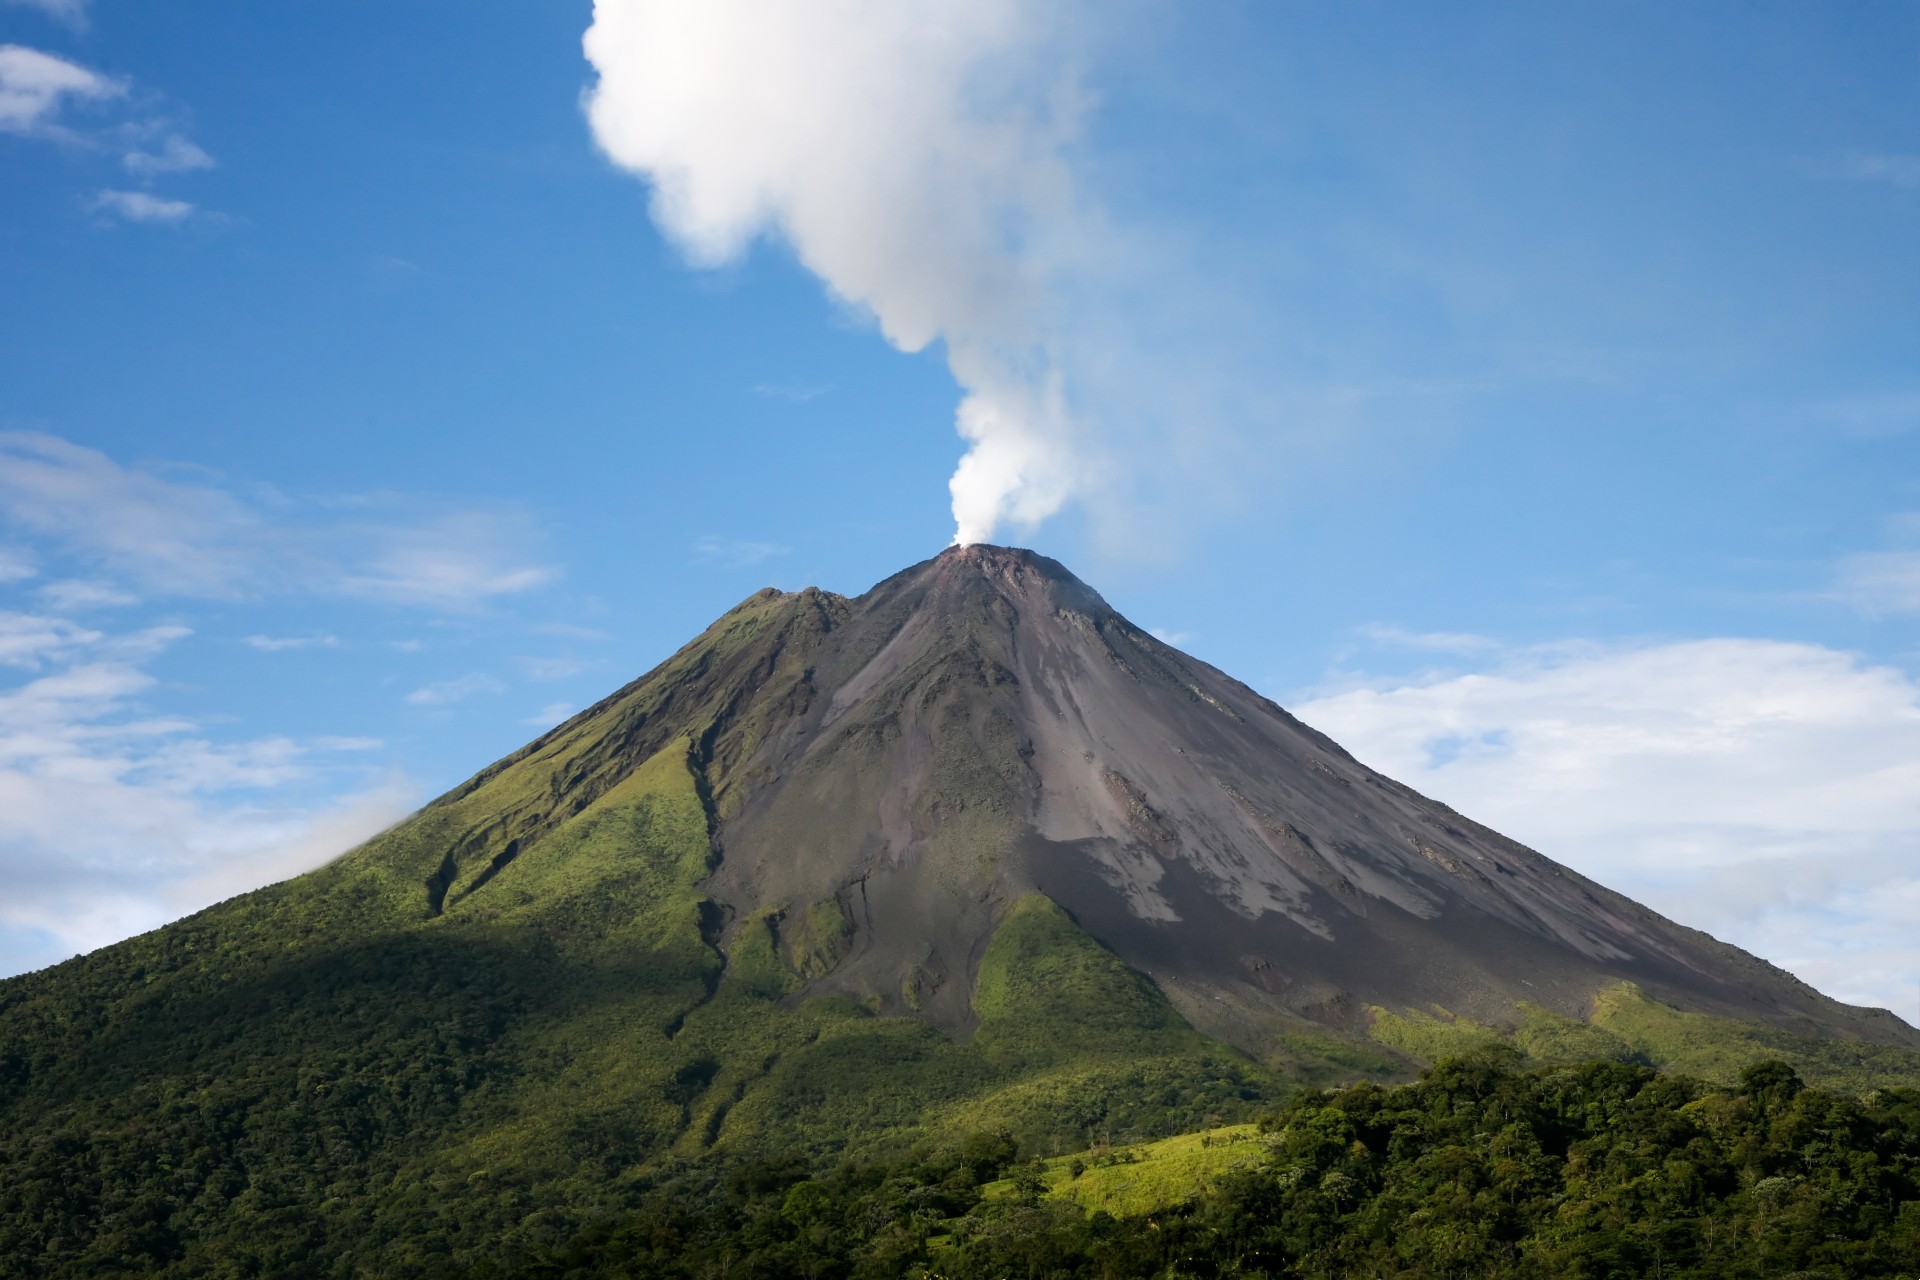 A photo of the Arenal volcano in Costa Rica